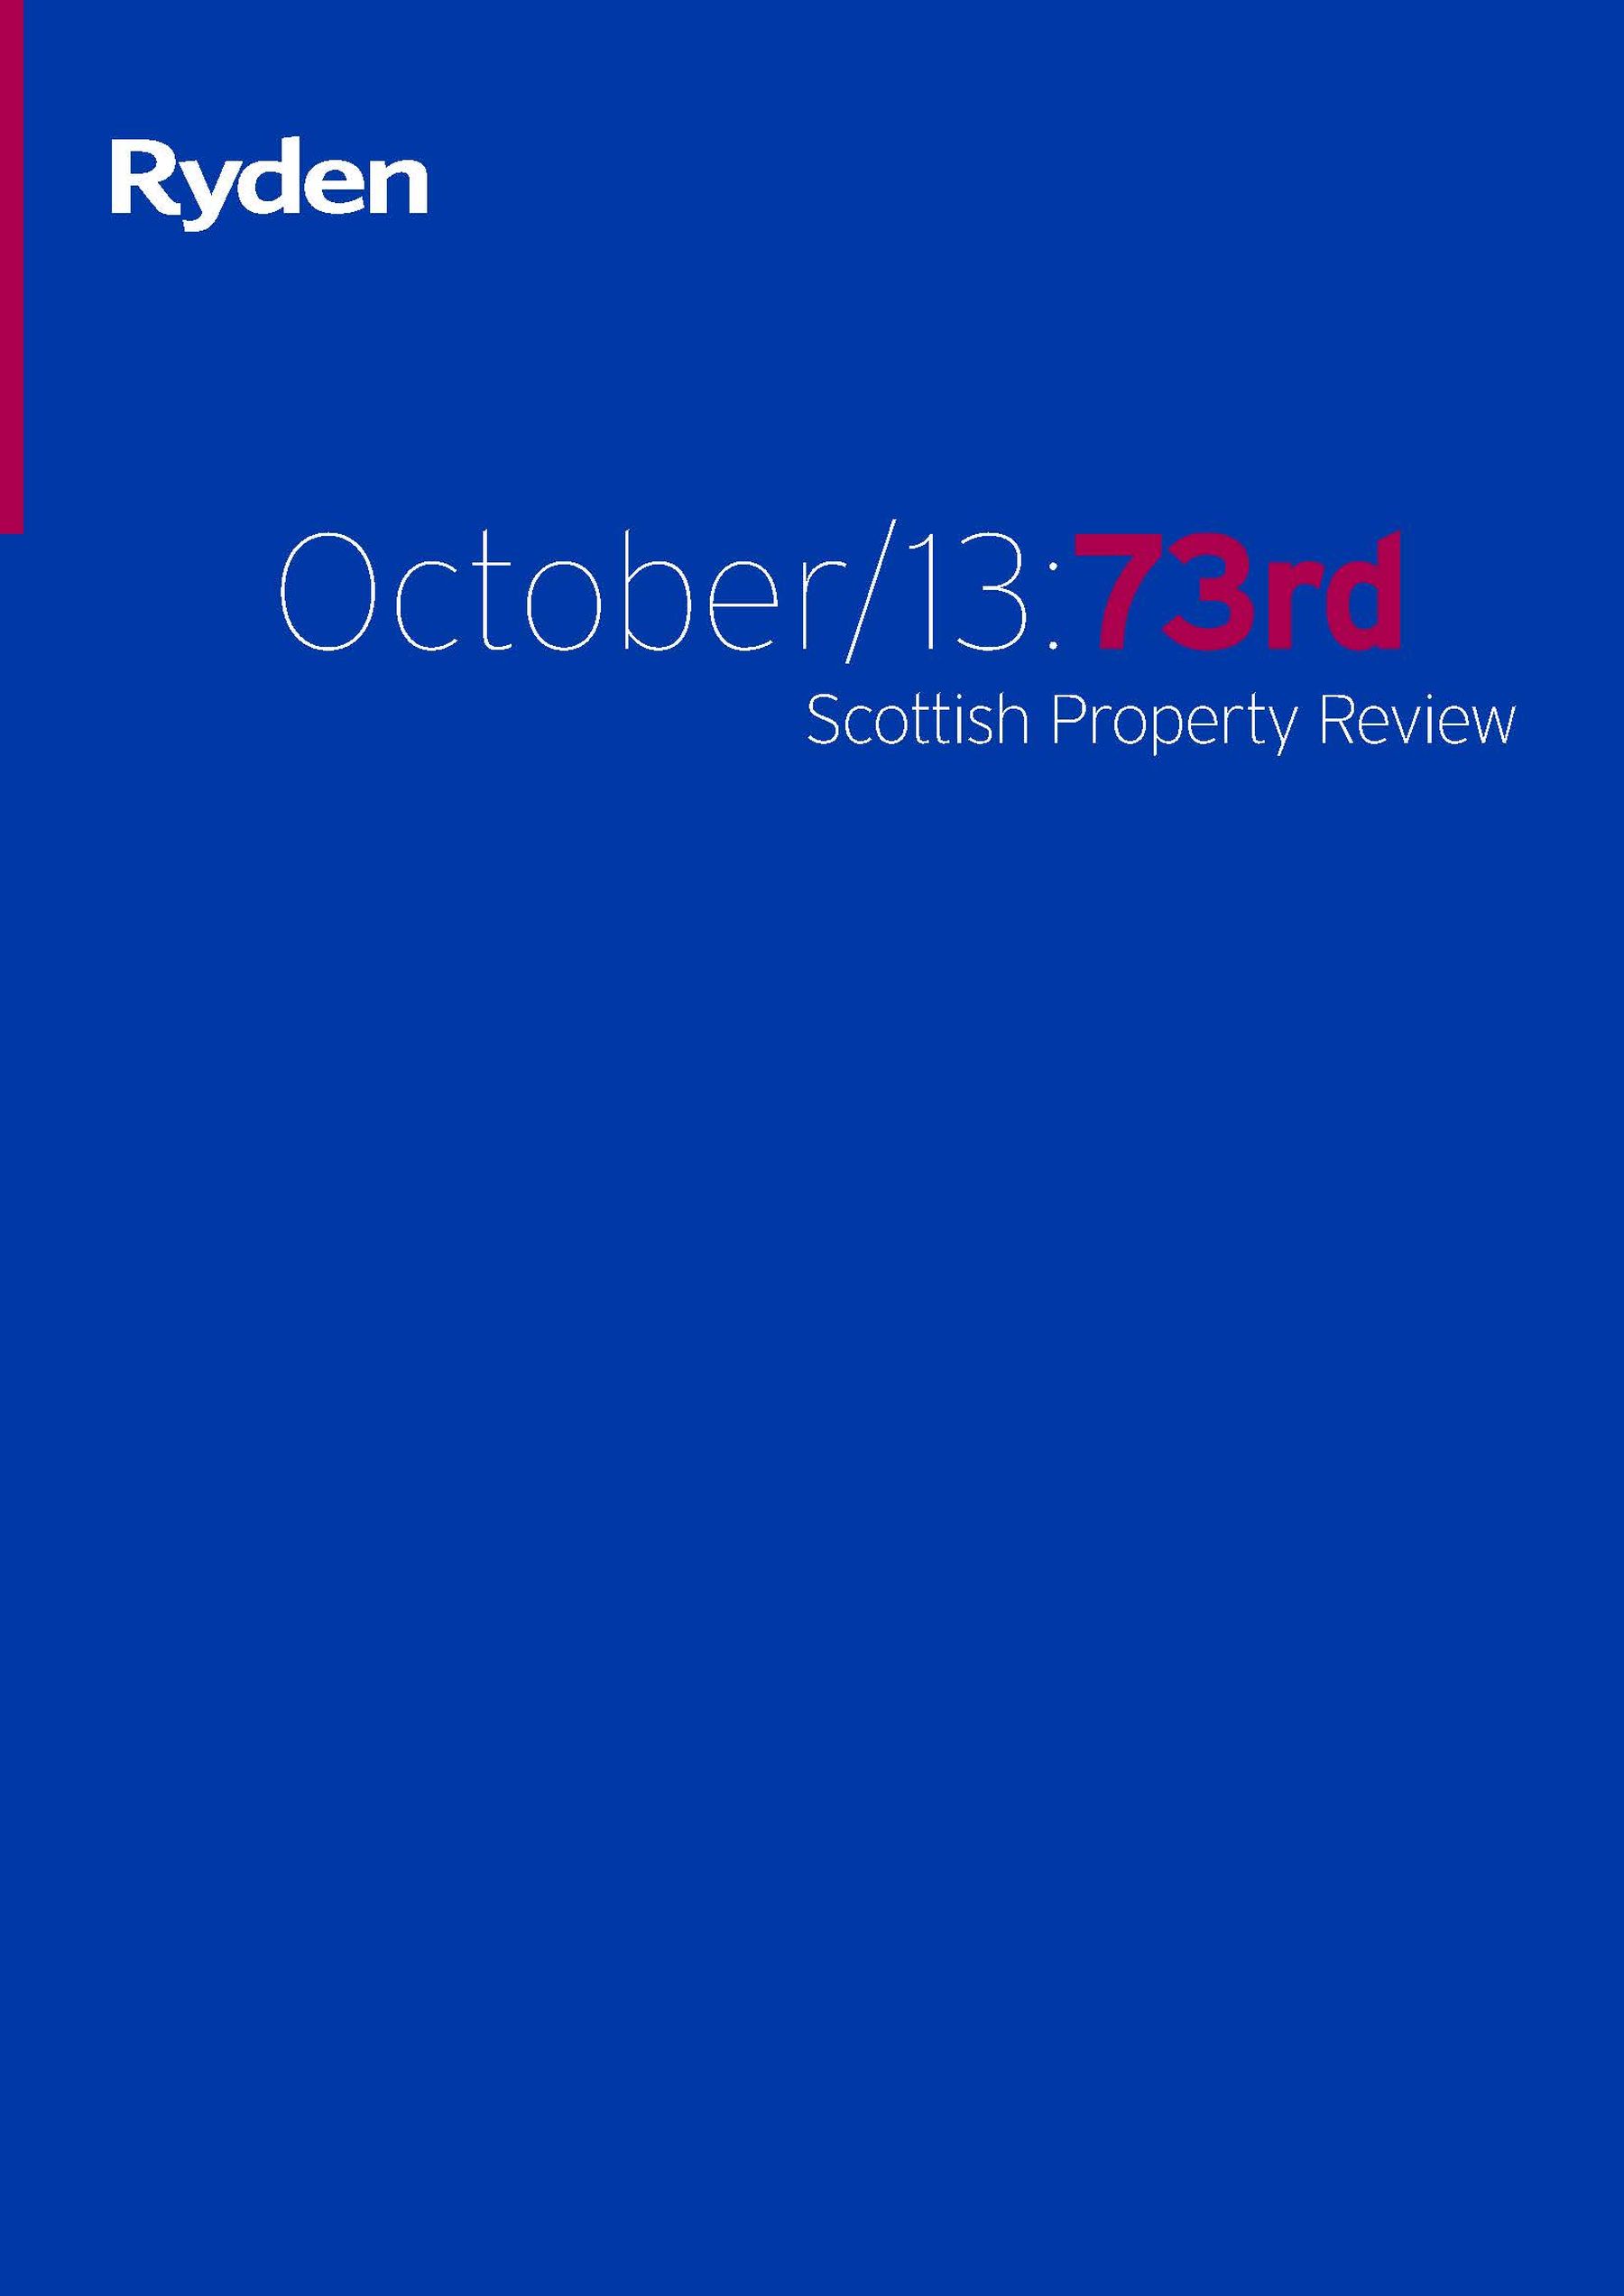 Scottish Property Review October 2013 Image